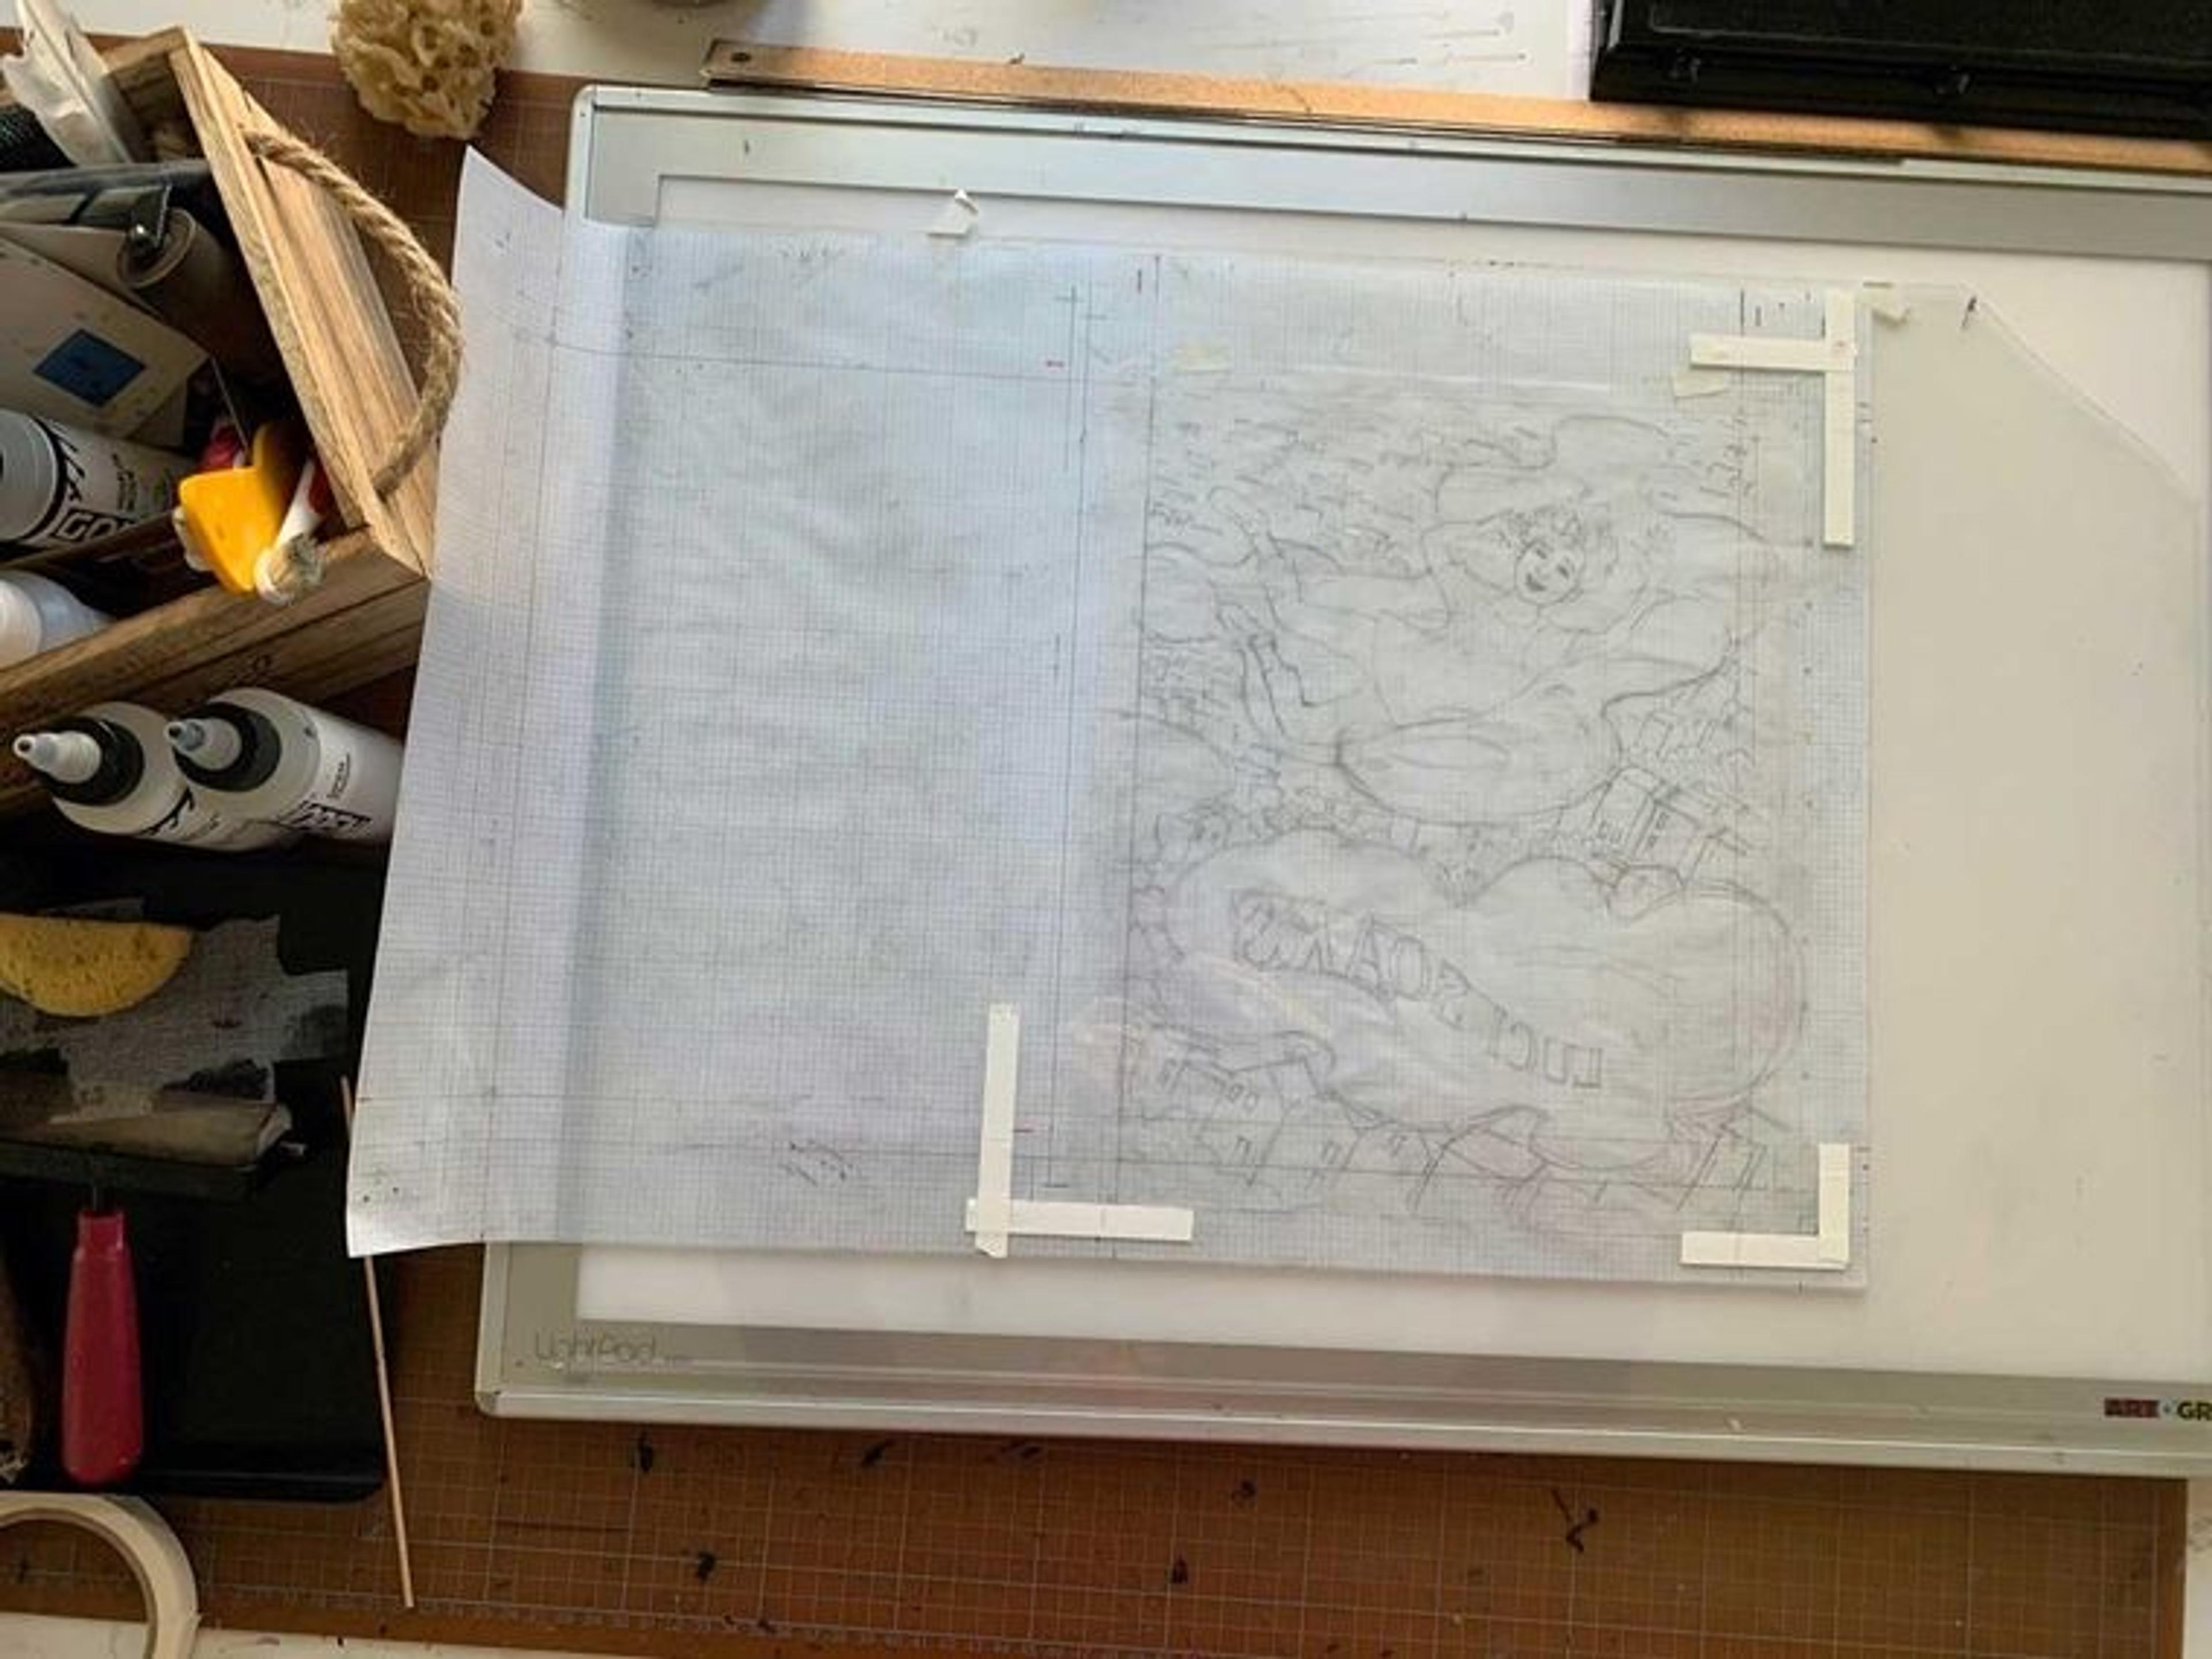 A pencil sketch of the mirror image of the cover of Luci Soars on tracing paper sits on a workbench. The corners of the page are registered with pieces of white tape.